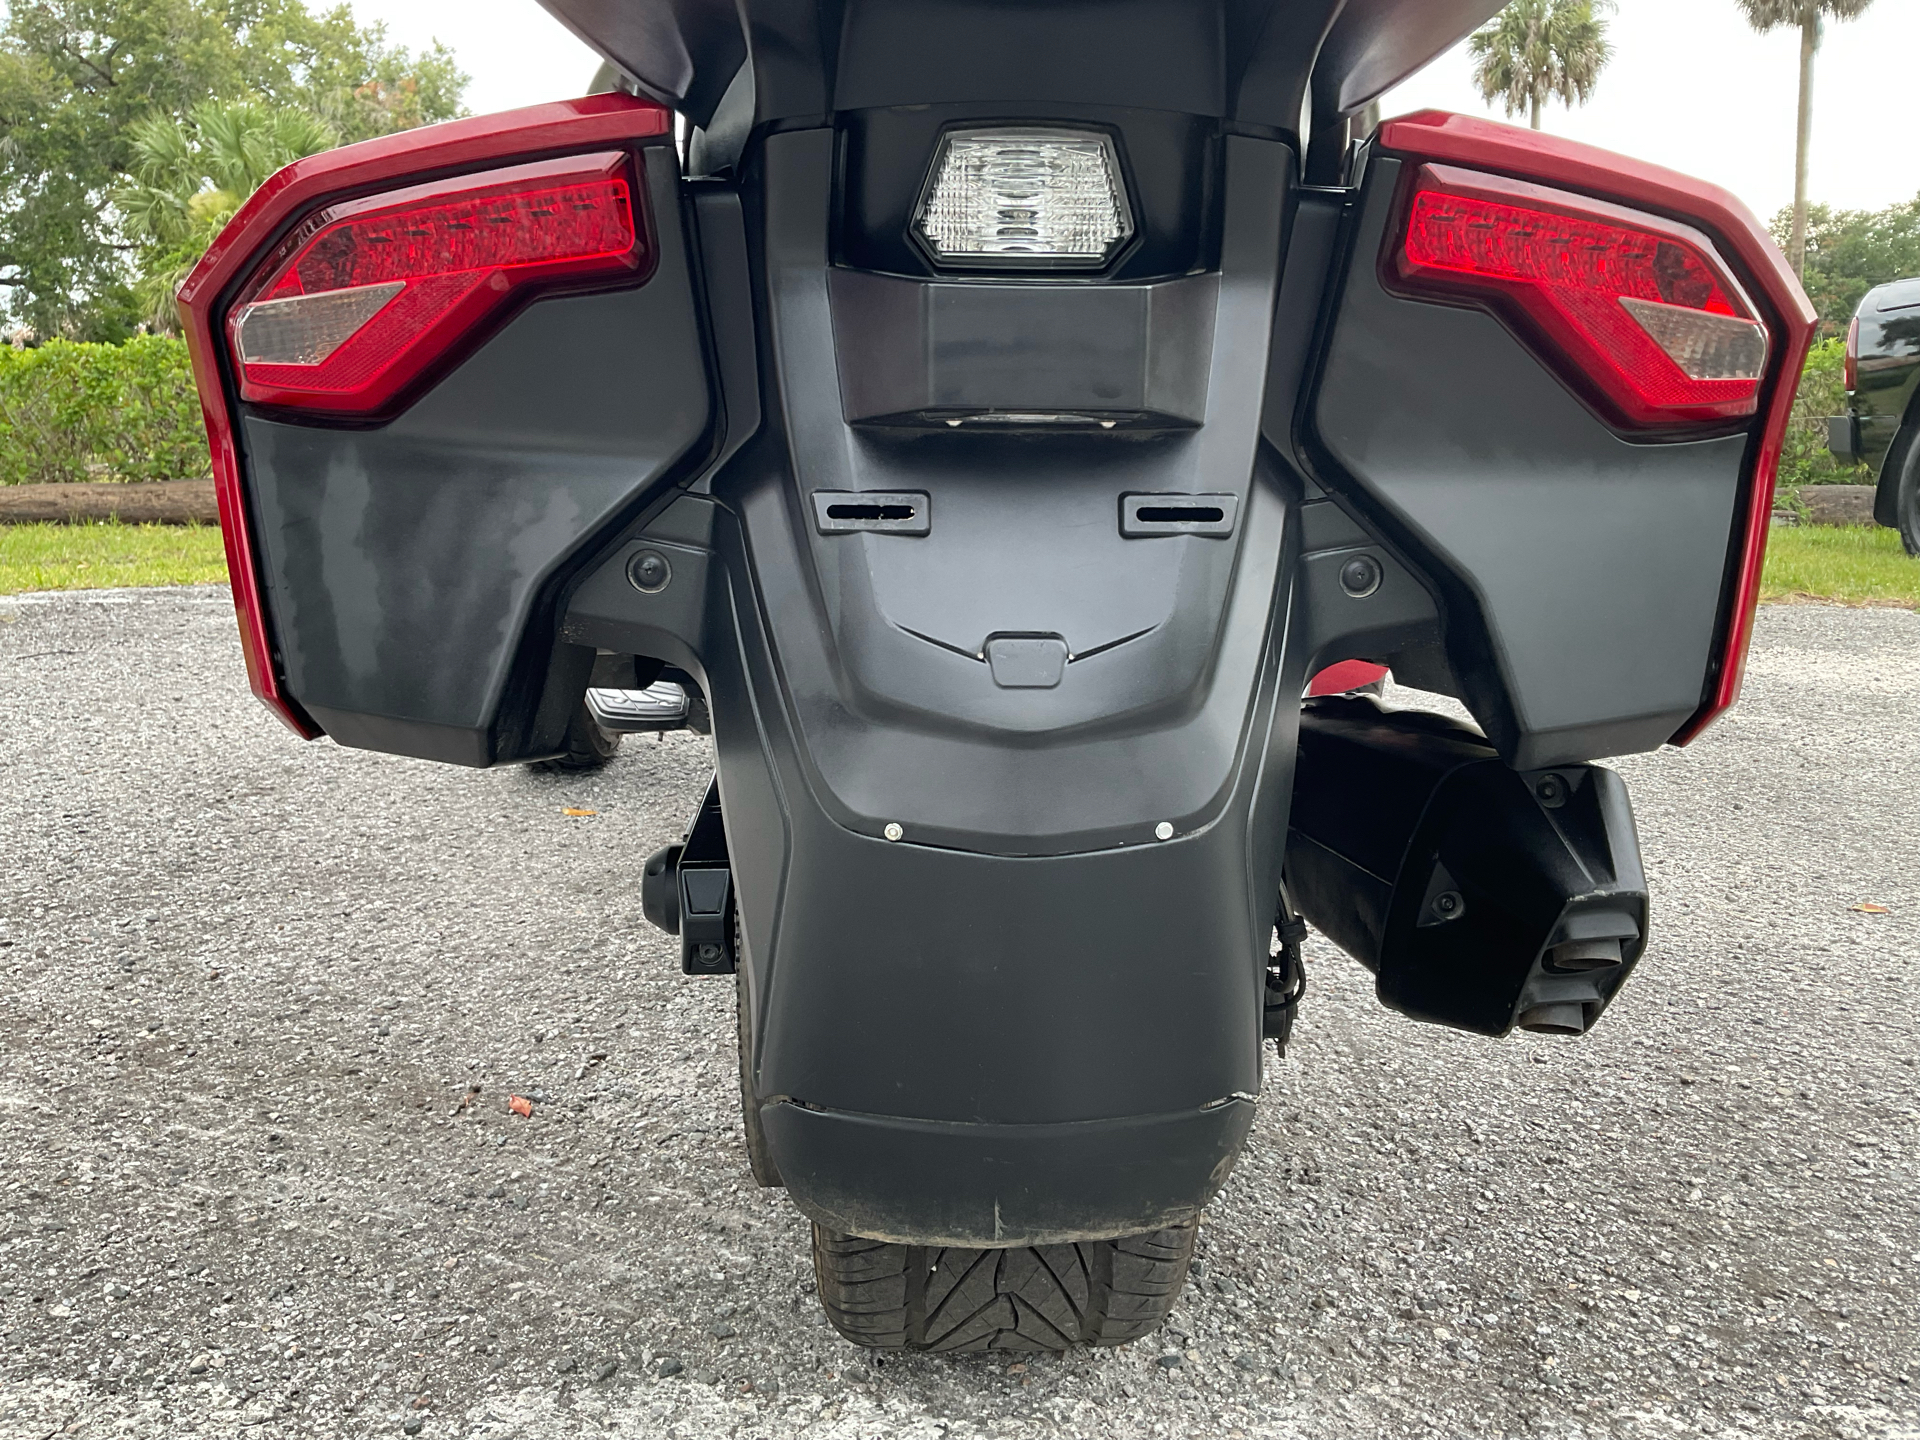 2017 Can-Am Spyder F3 Limited in Sanford, Florida - Photo 23